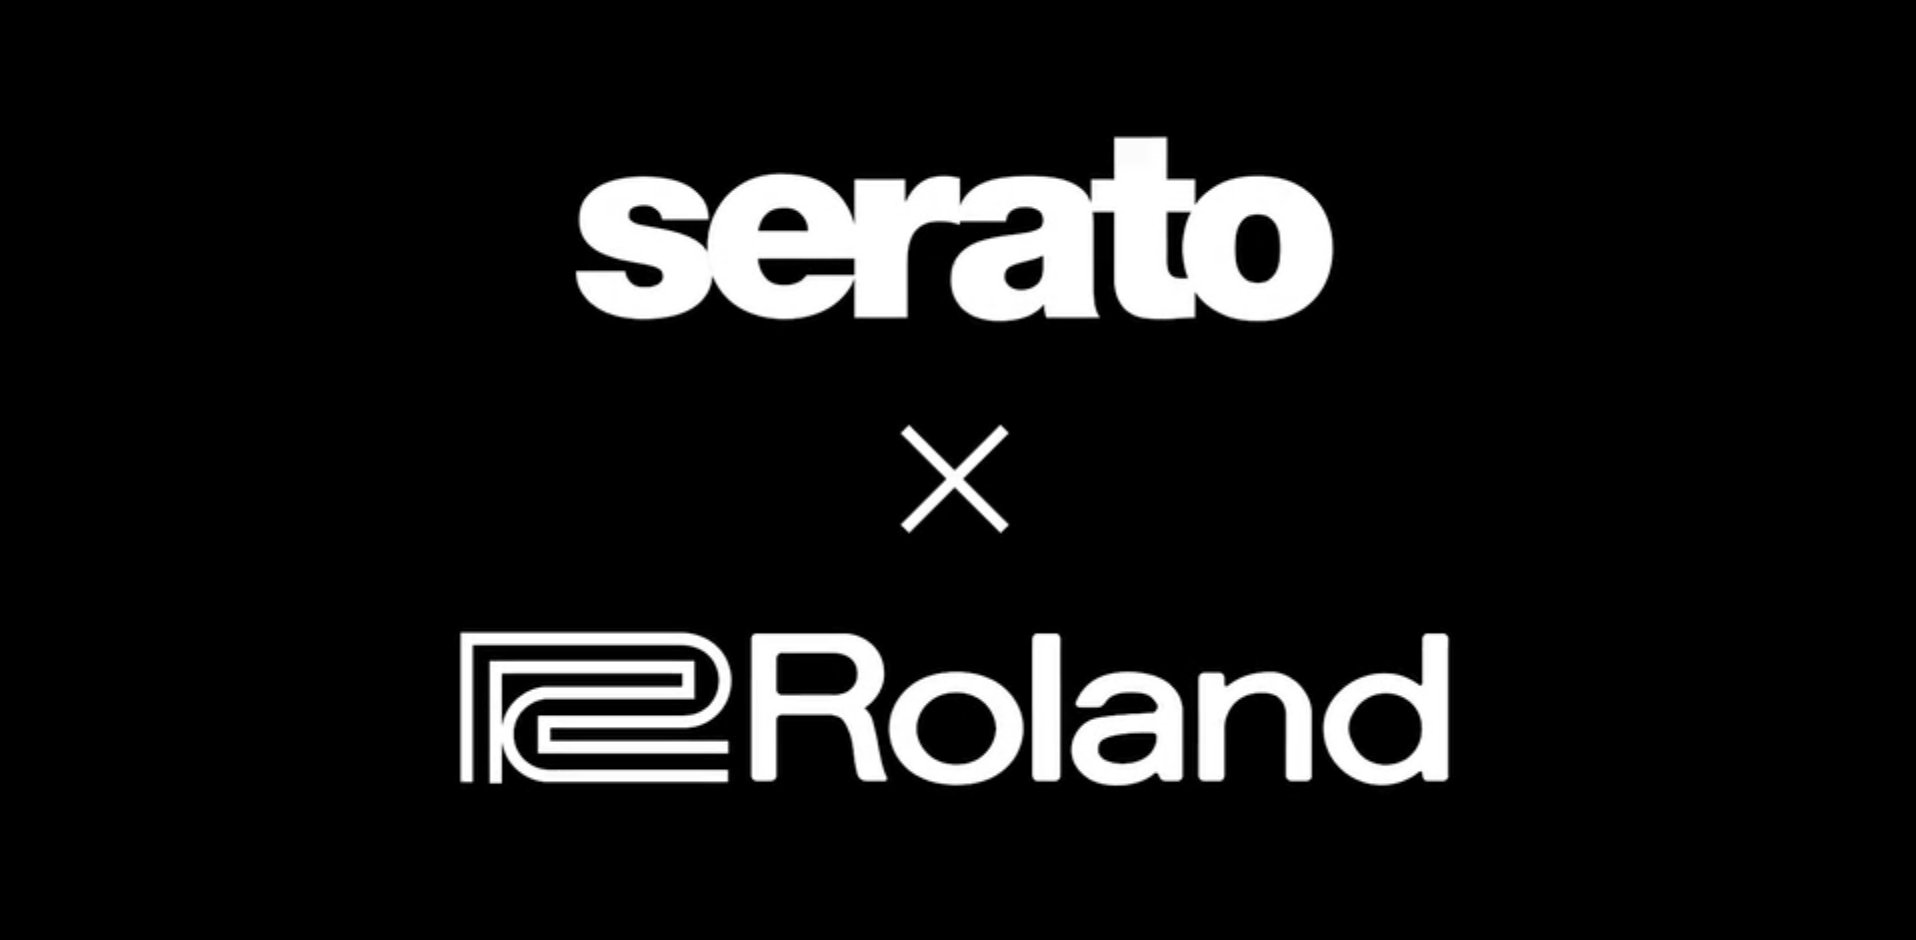 Serato announce a partnership with Roland to redefine DJing